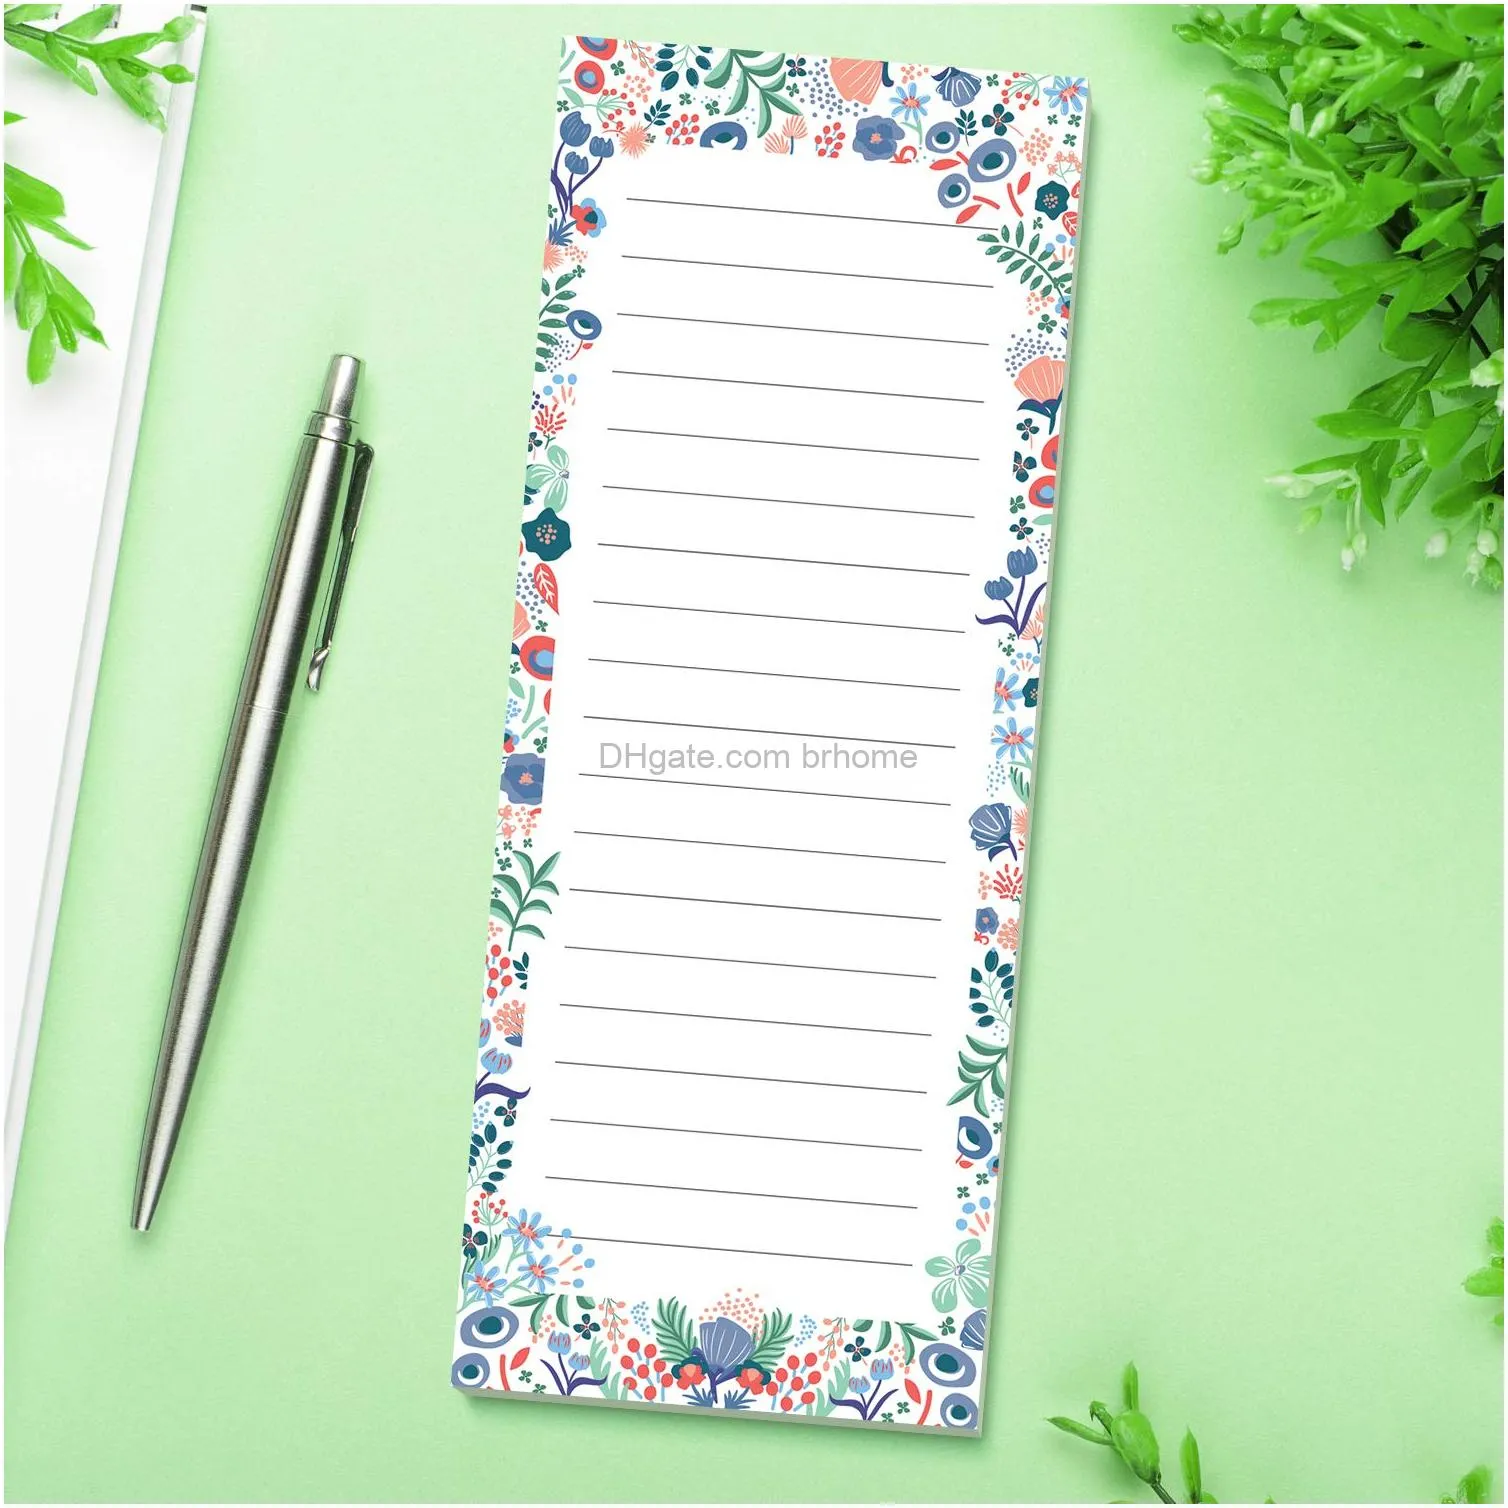 magnetic grocery list for fridge floral theme 3 5 x 9 memo notepad for shopping locker filing cabinet to do appointment reminders meal plans 55 sheets per pad